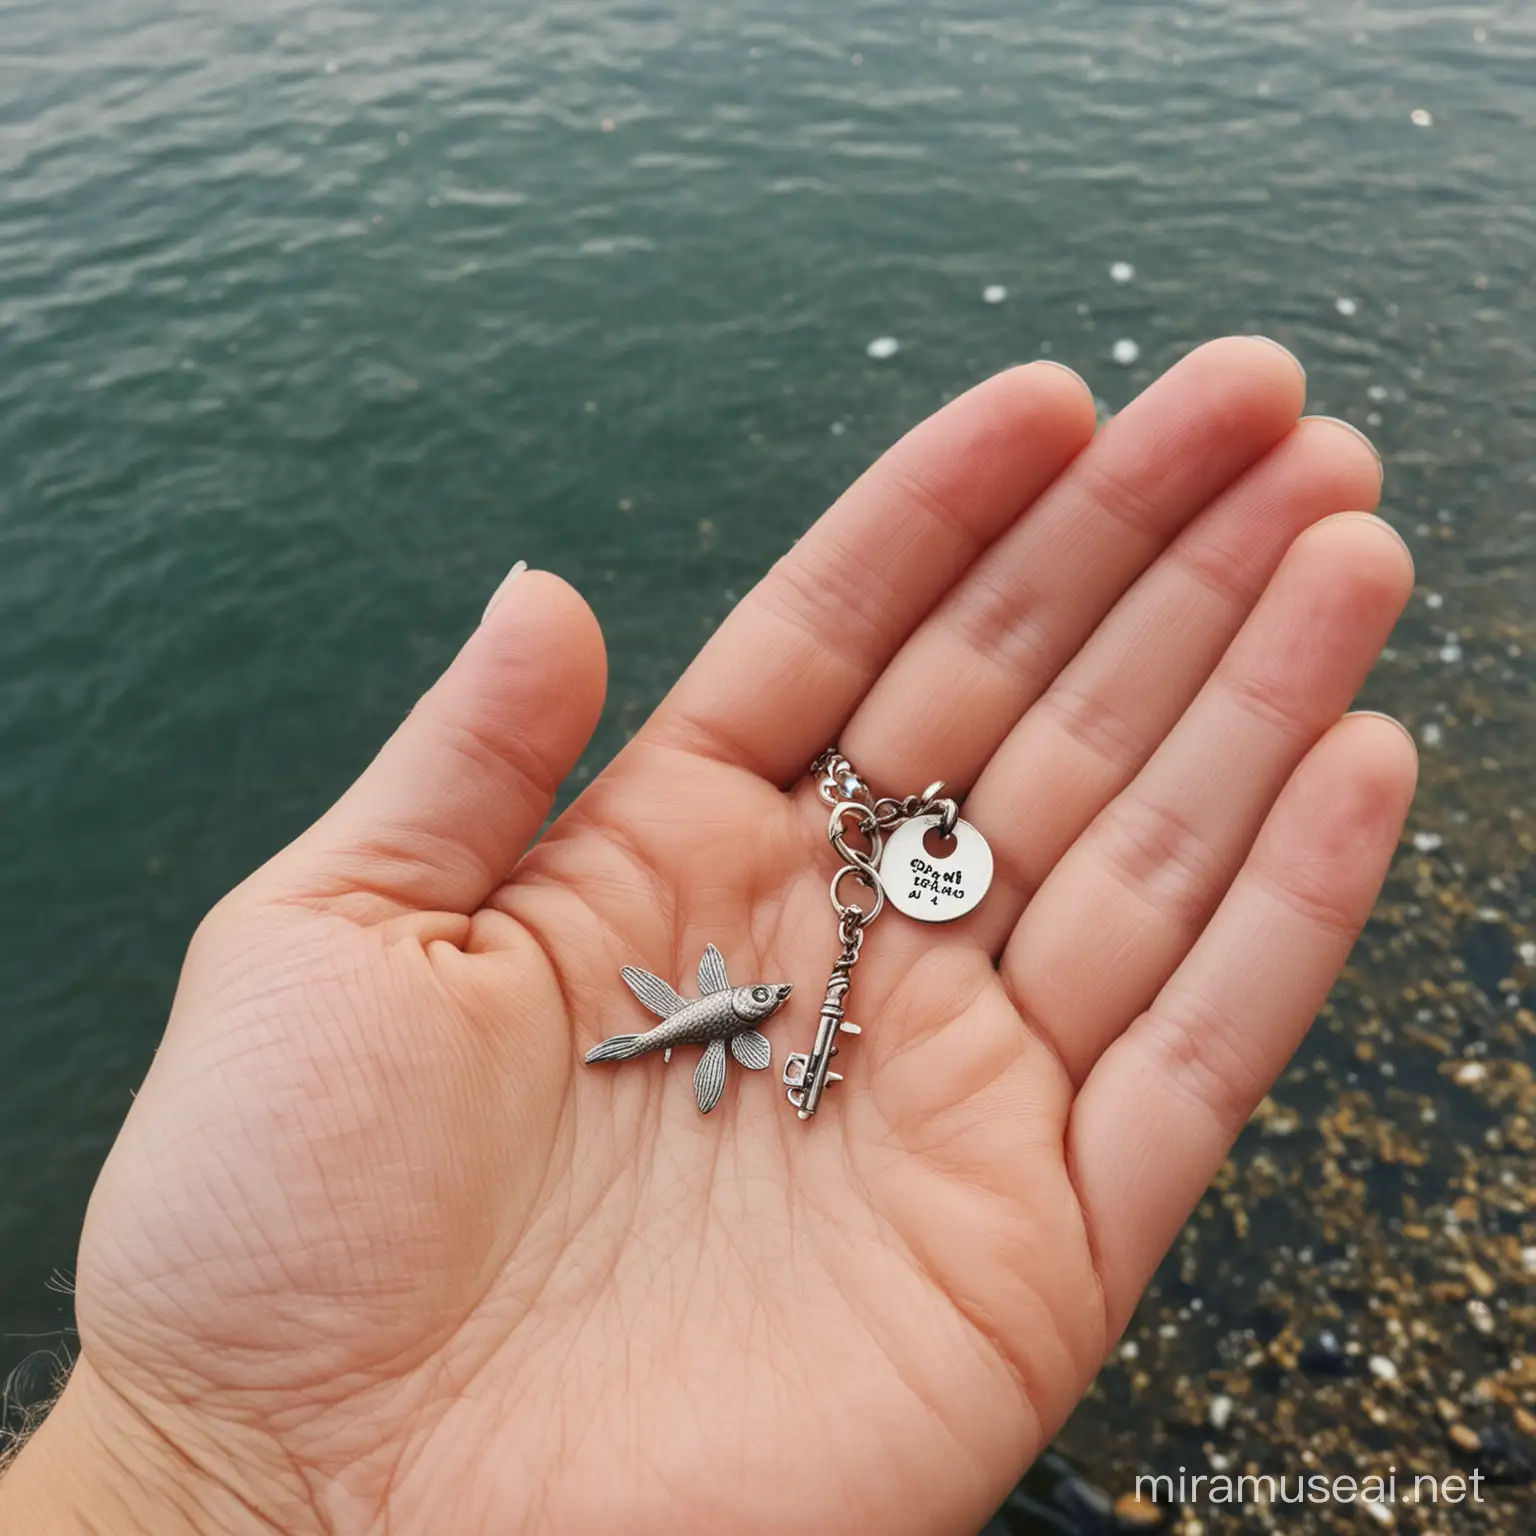 Fishermans Magical Encounter with a Grateful Tiny Fish